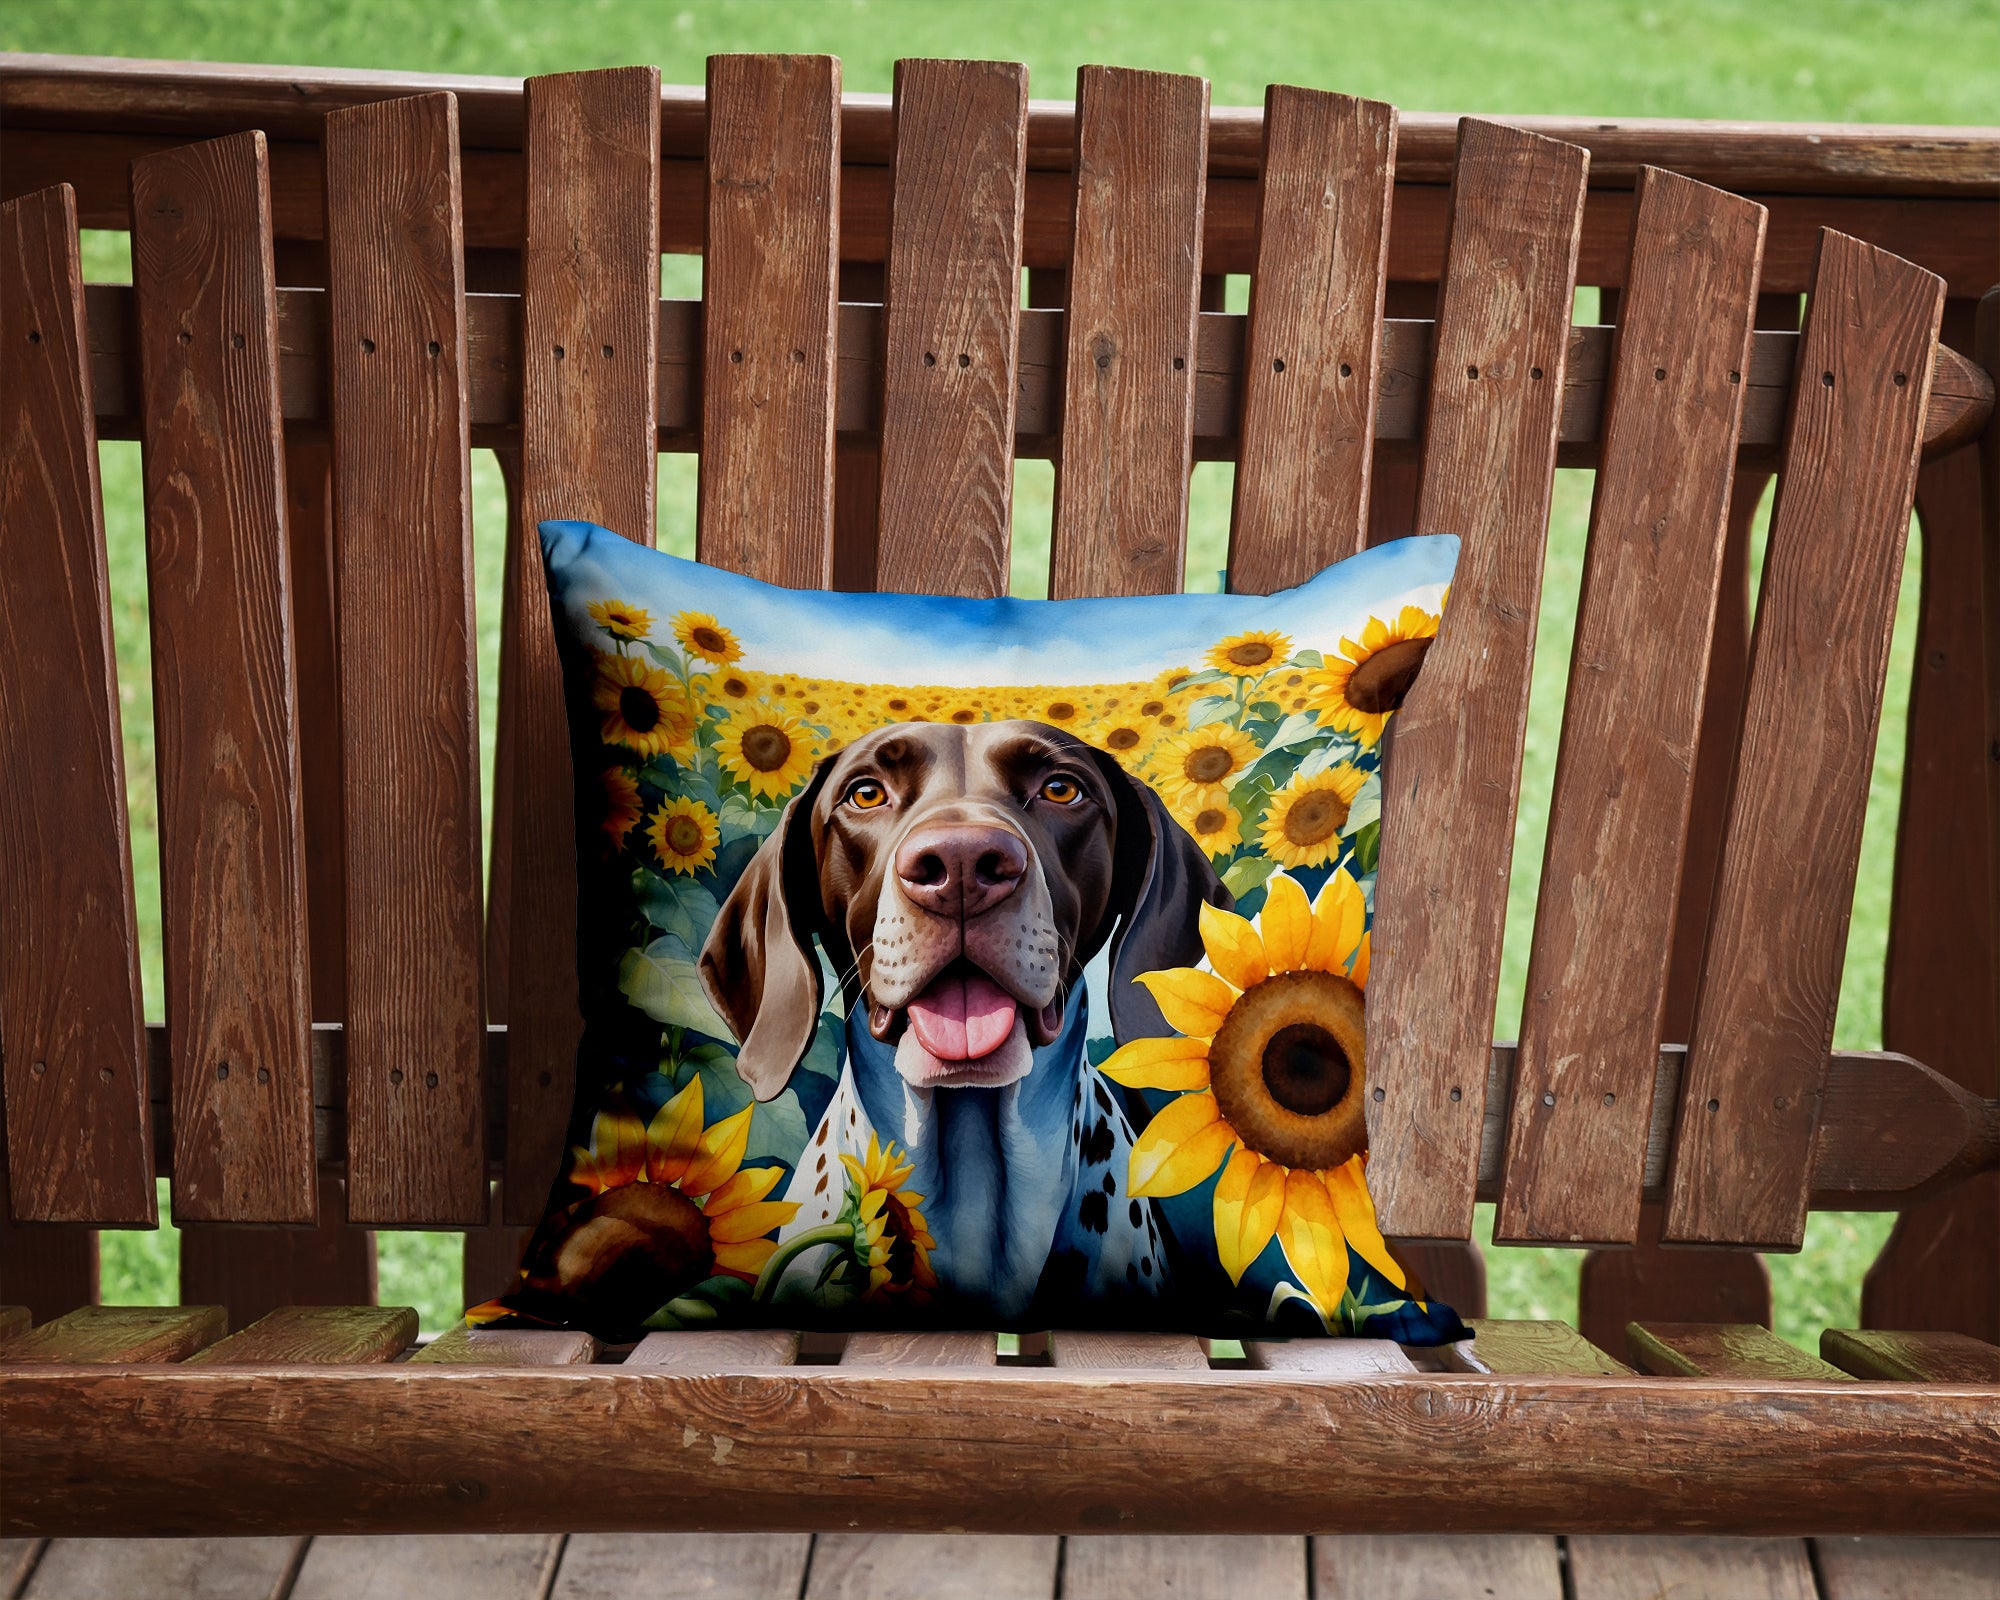 Buy this German Shorthaired Pointer in Sunflowers Throw Pillow